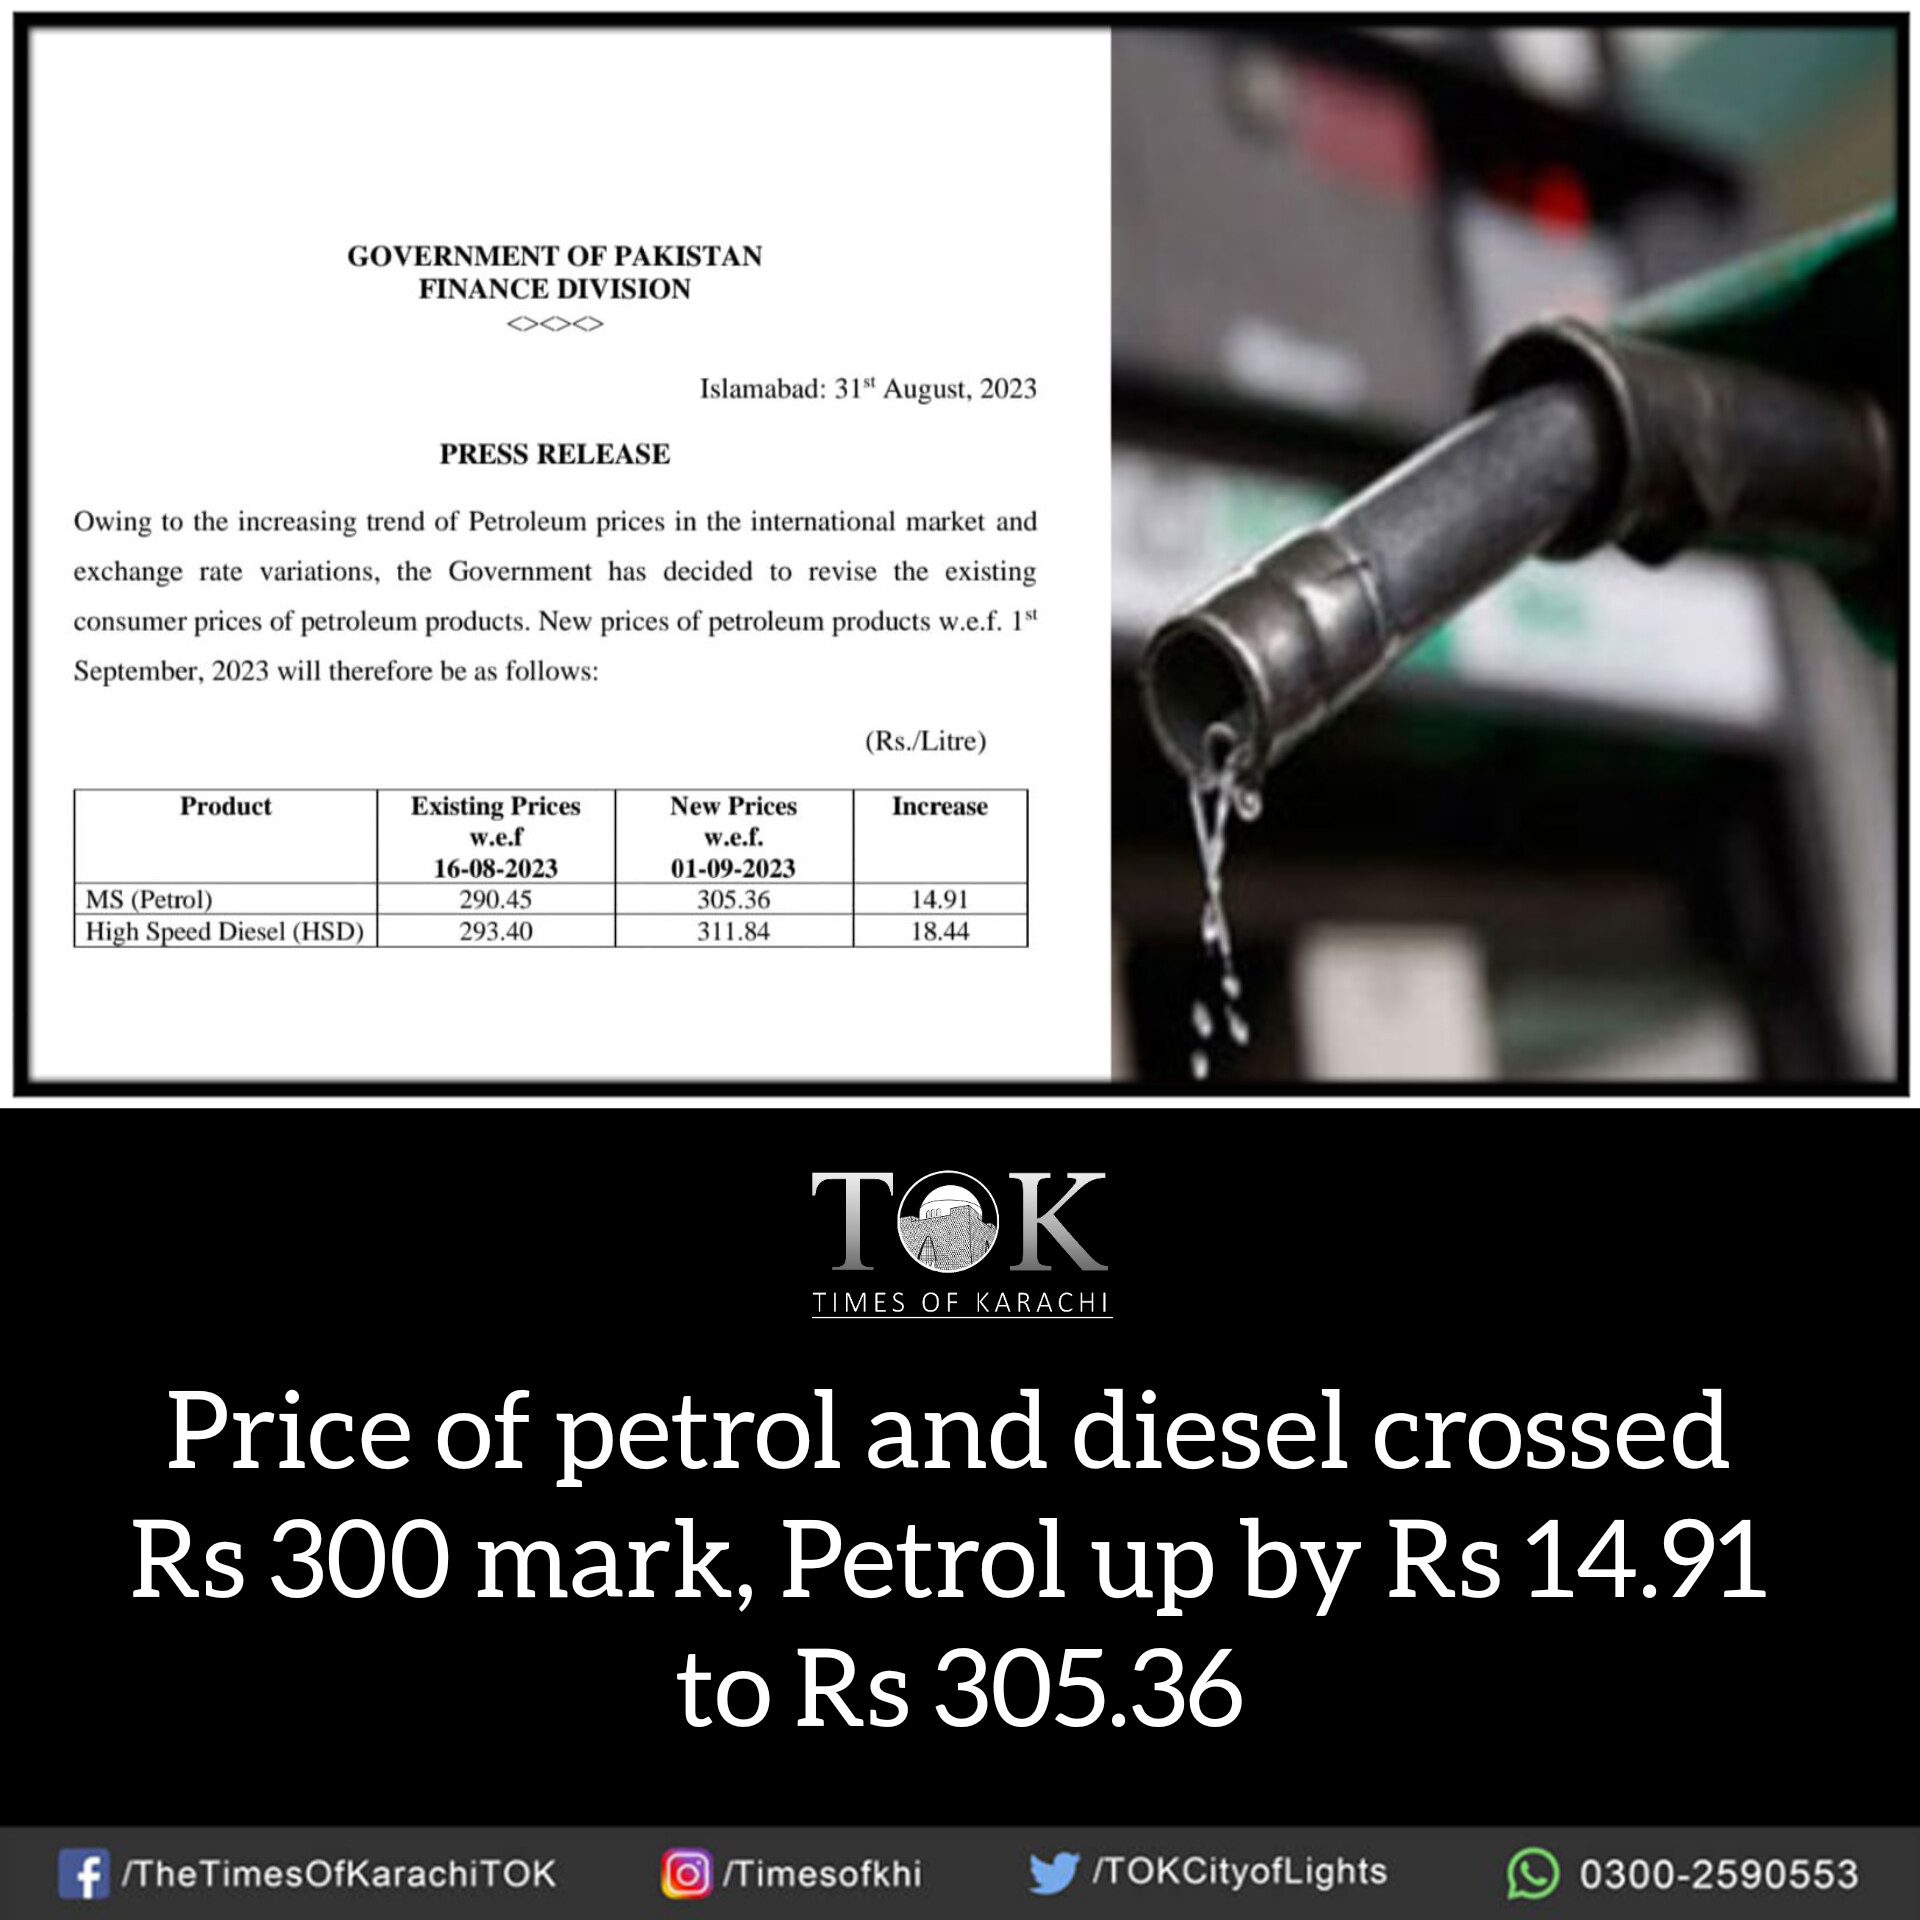 The price of petroleum has once again increased by 14 rupees 91 paise per liter.